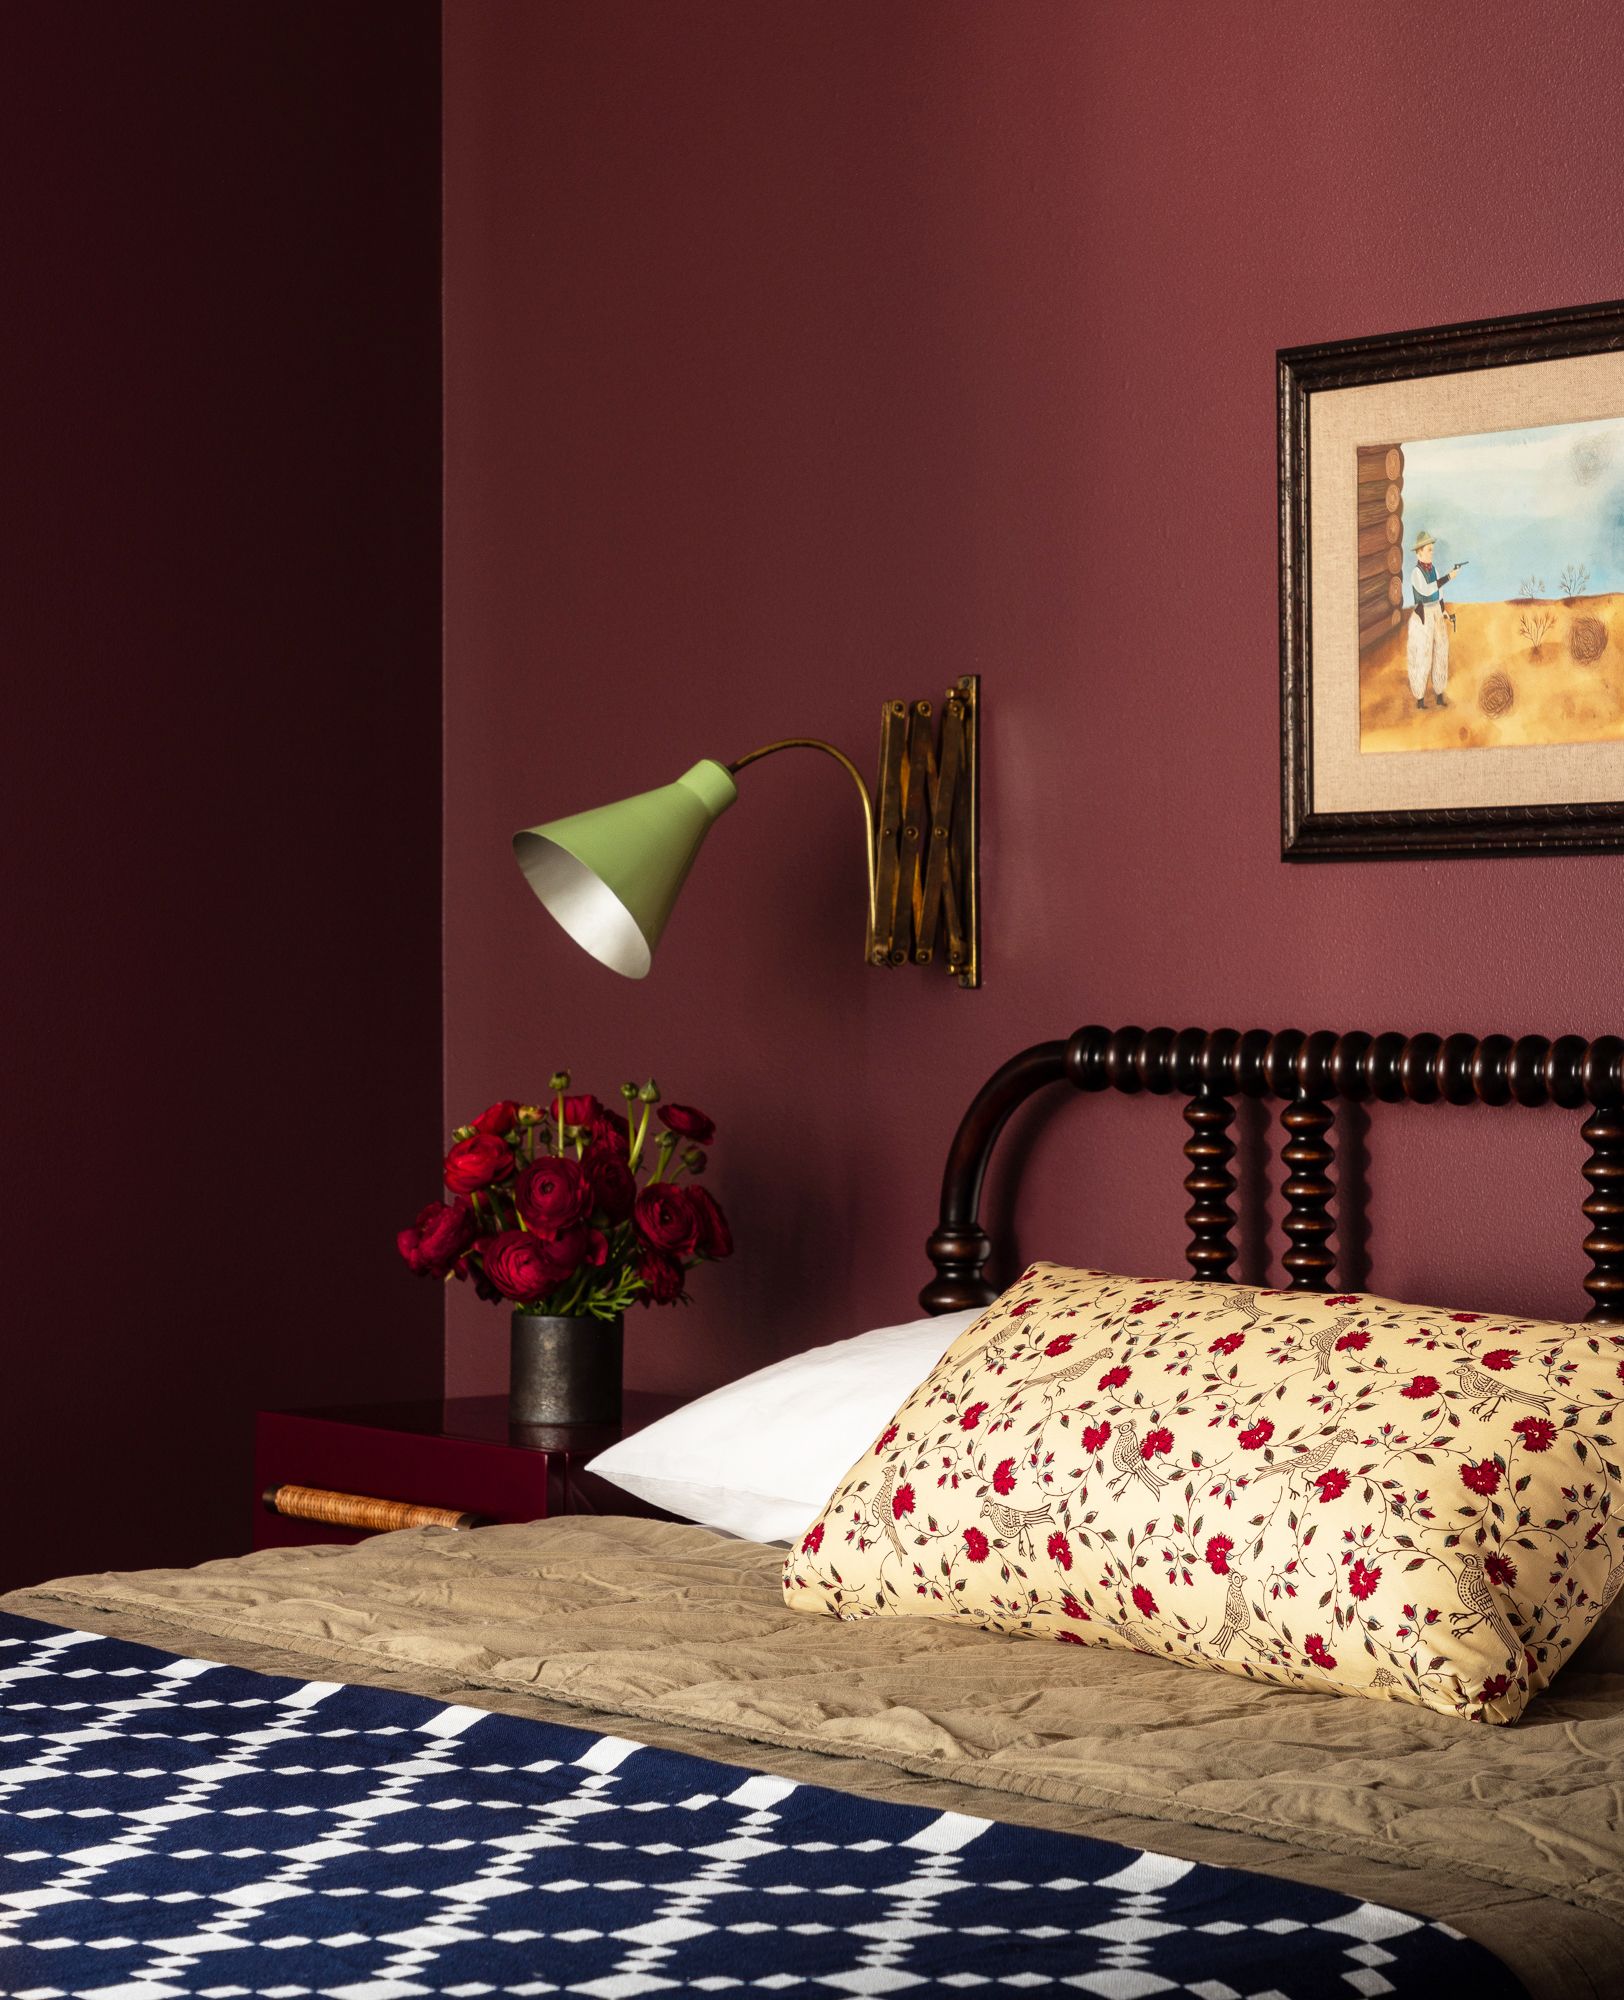 25 Colors That Go With Red at Home